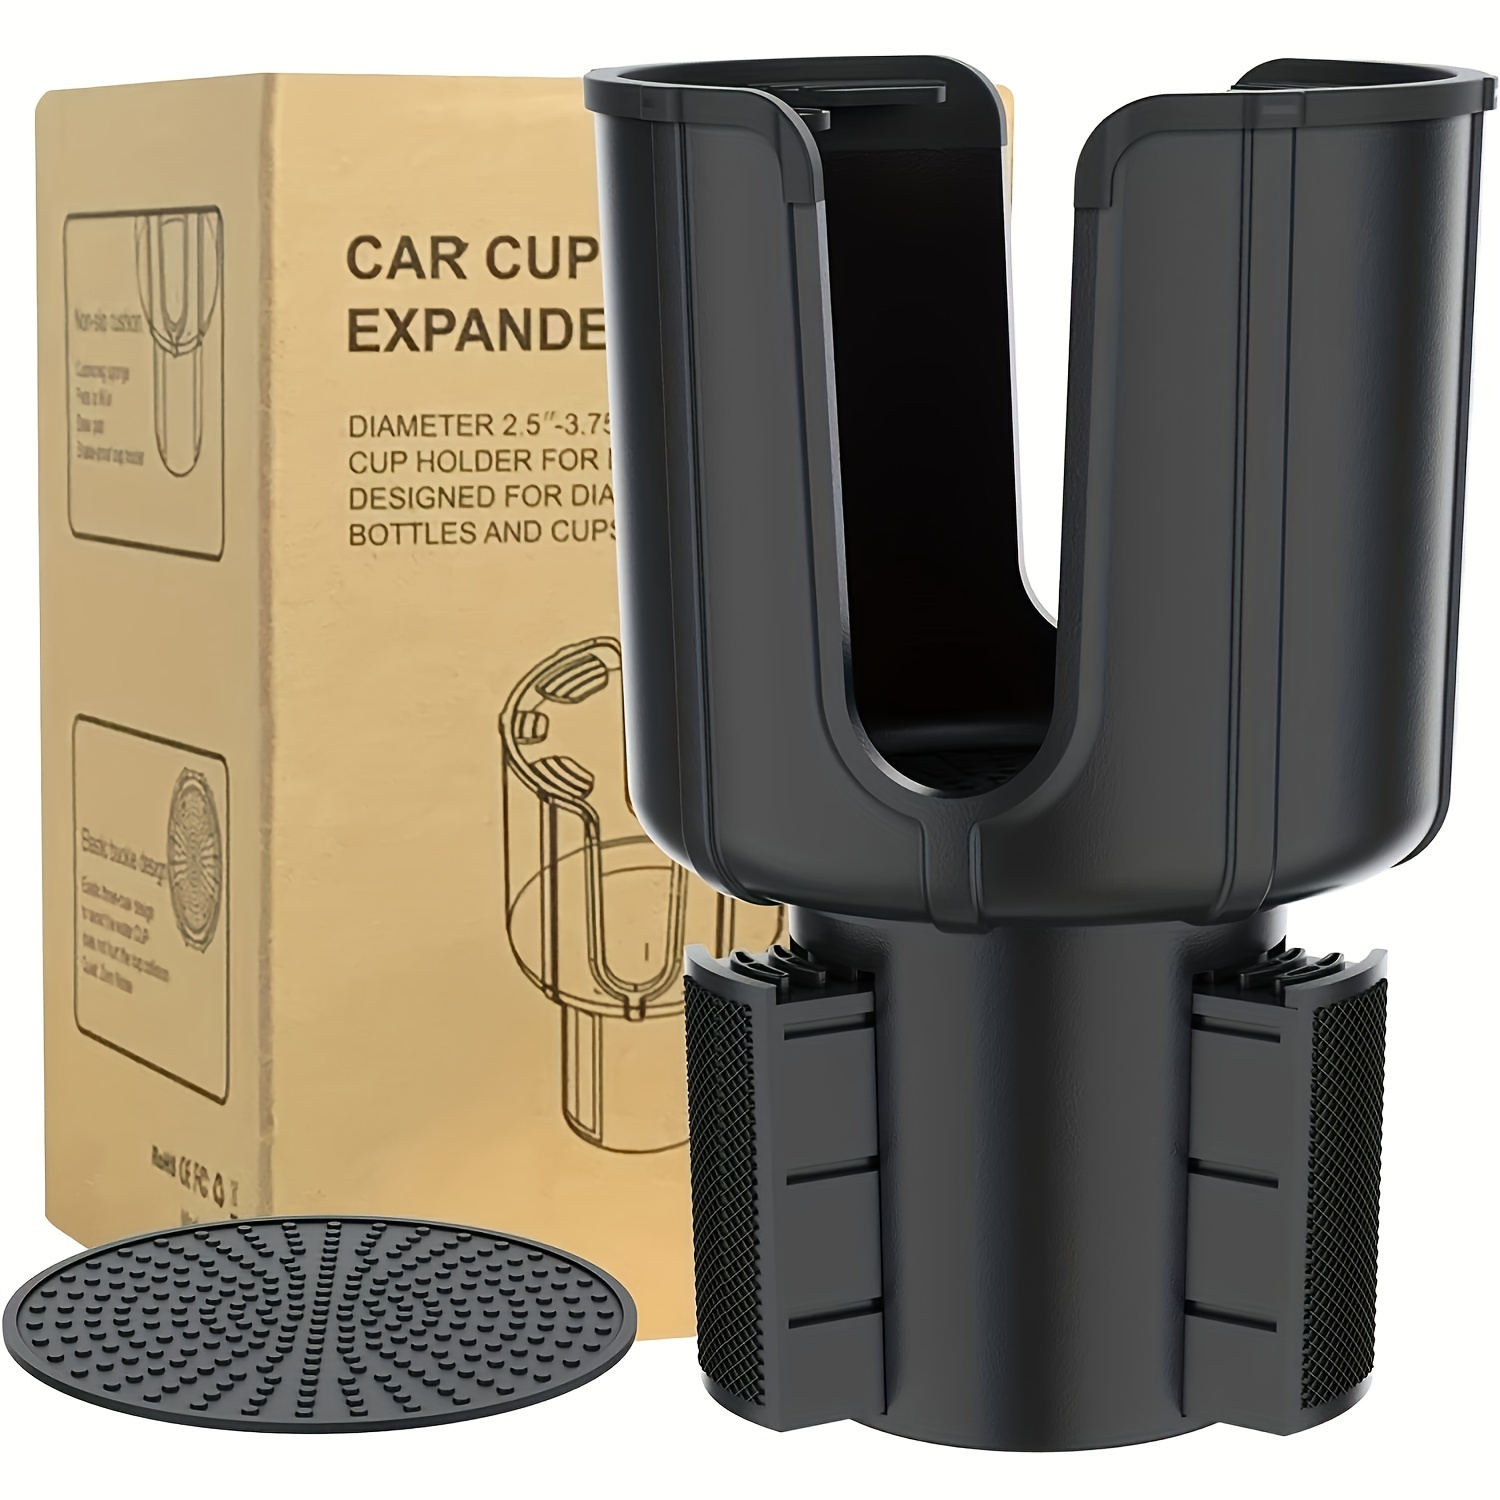 

2 Pcs Car-cup-holder-expander For Car Organizer With Adjustable Base Compatible With 20/26/30 Oz Hydro Flasks Large 32/40oz, Fits Most Cup Holder, Diameter Bottles In 4.11"-4.44